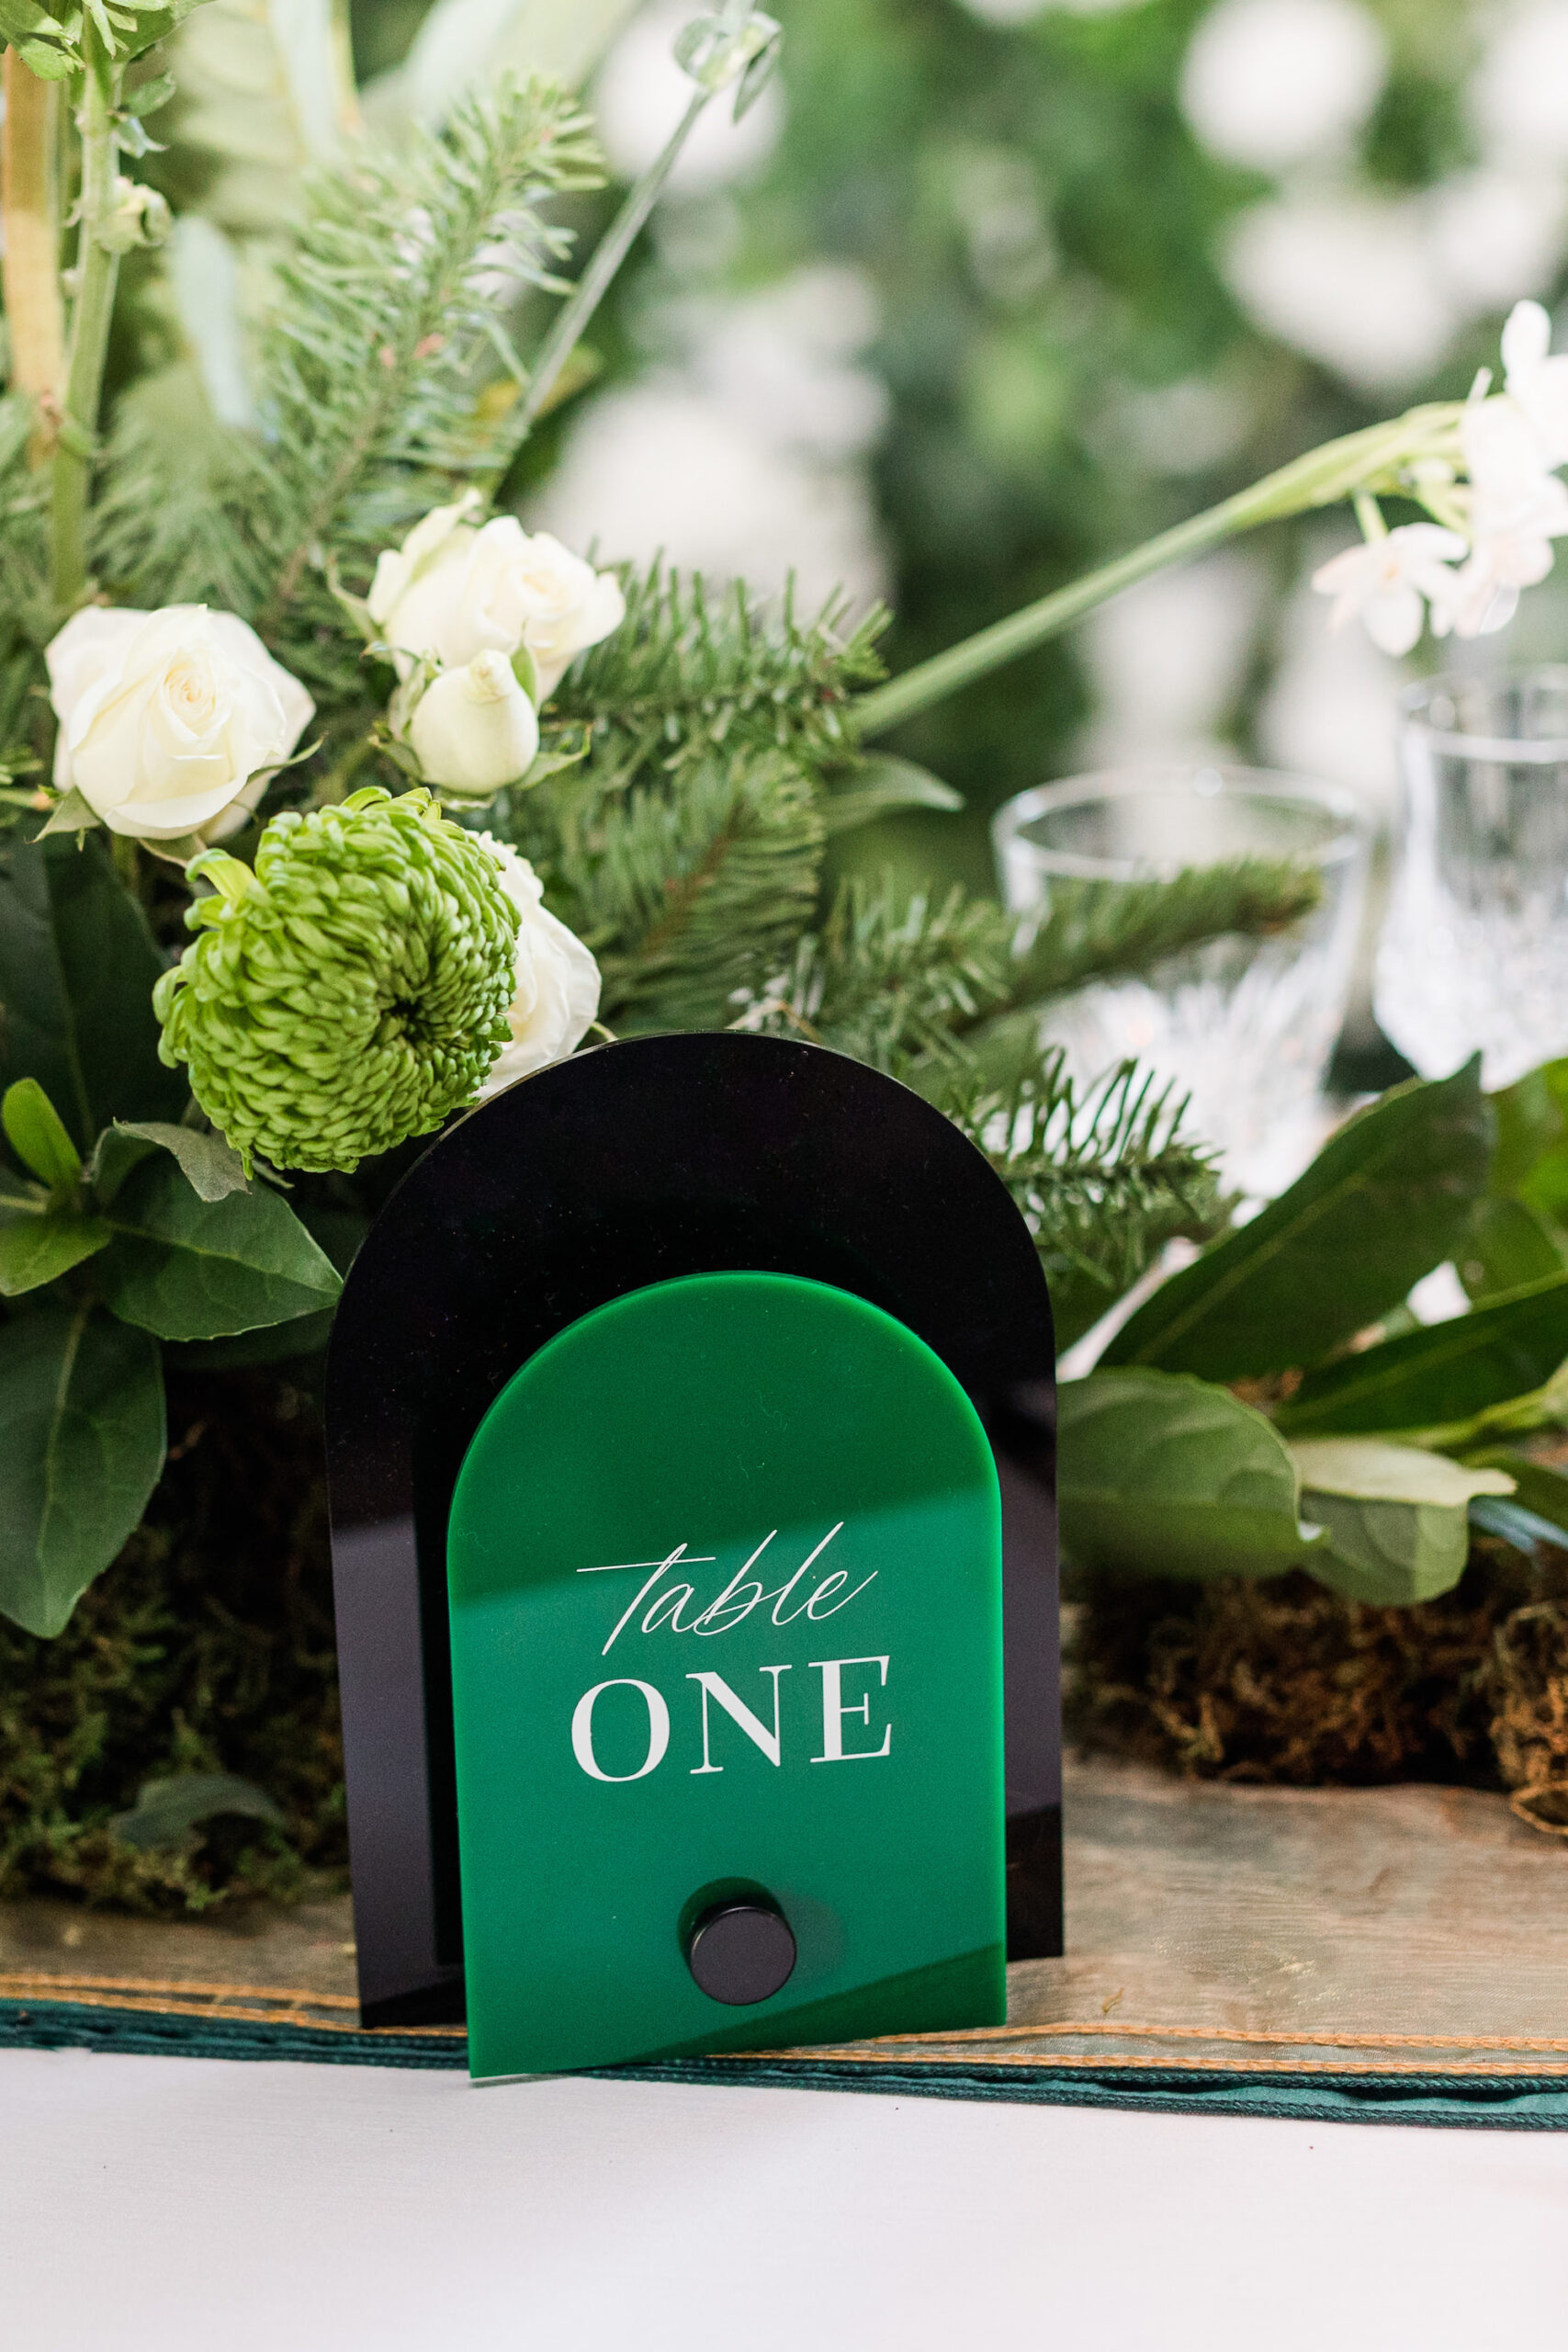 Winter Modern Whimsical Wedding Reception Styled Shoot Decor, Arched Acrylic Black and Emerald Table Numbers | Tampa Bay Wedding Planner MDP Events Planning